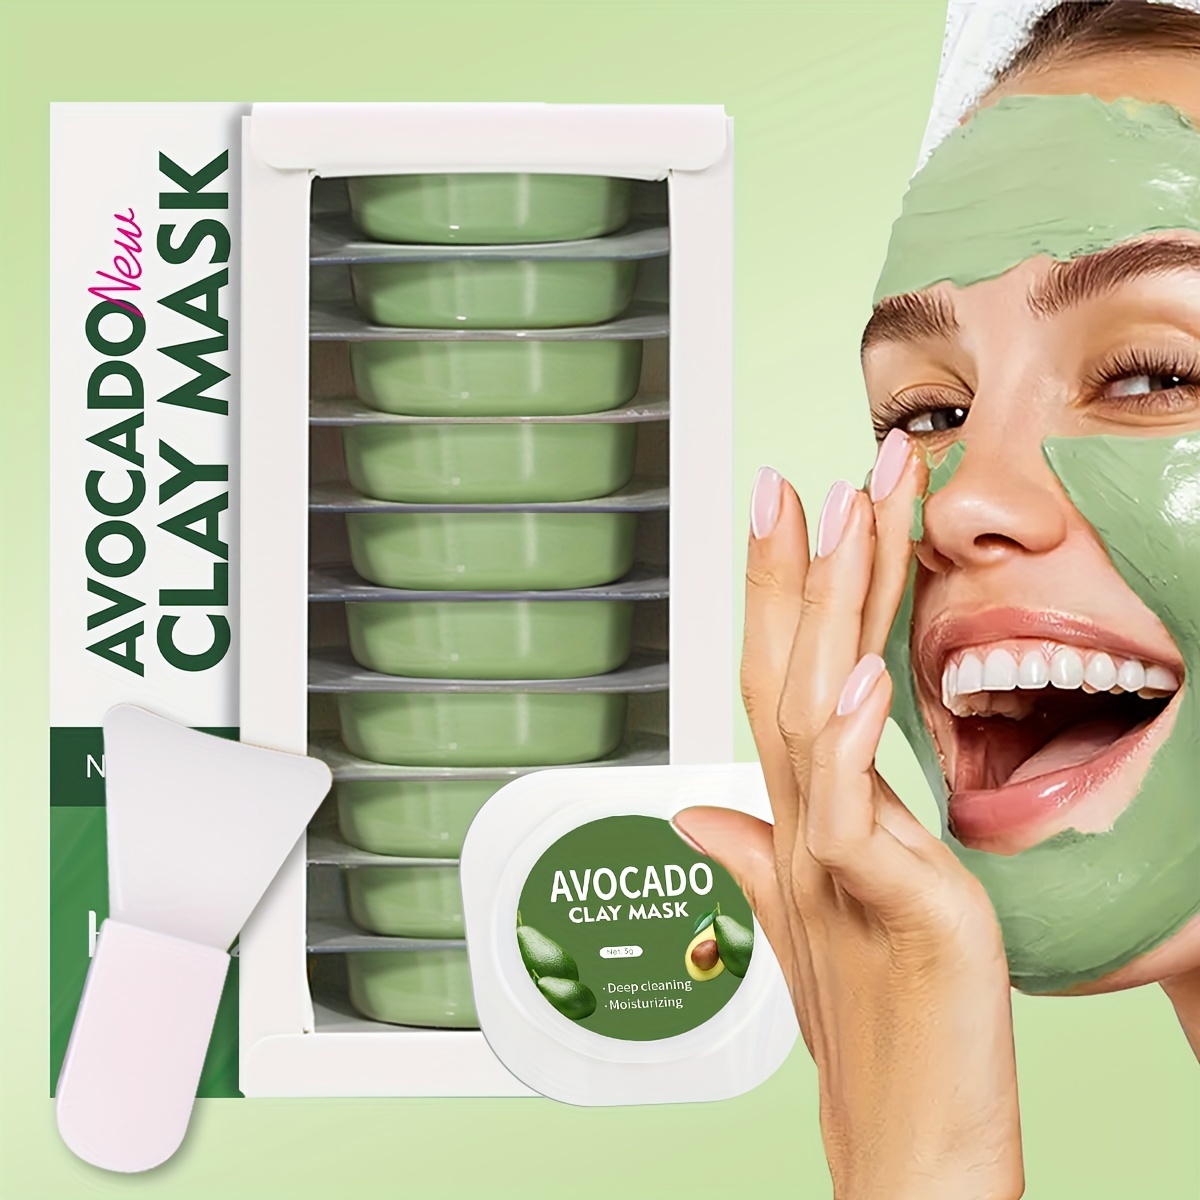 

10pcs*5g Avocado Clay Mask Facial Mud Mask For Deep Cleansing, Moisturizing, And Rejuvenating The Skin Travel Essential